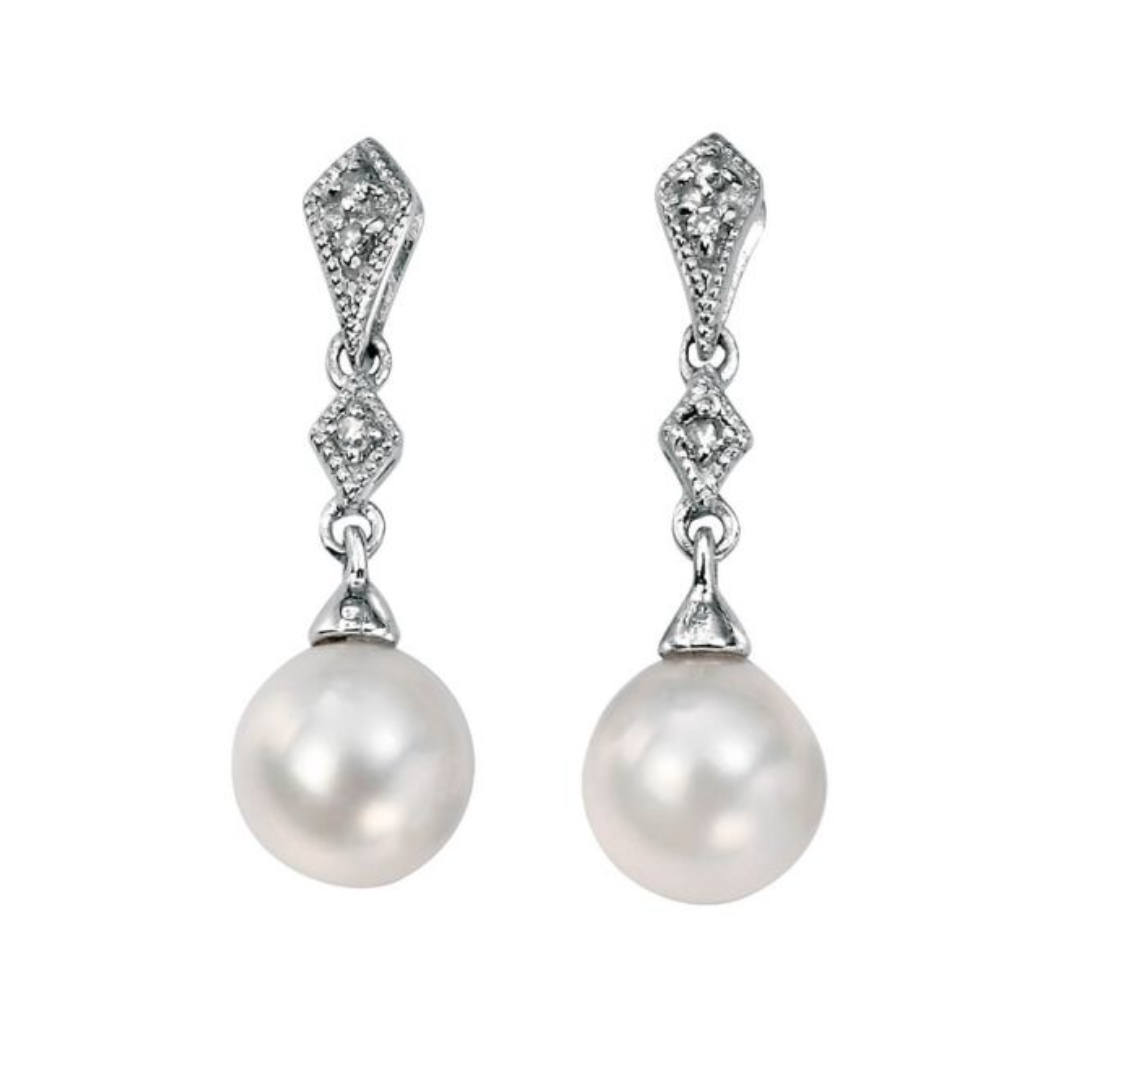 9ct White Gold Diamond and Freshwater Pearl Earrings | Hoppers Jewellers